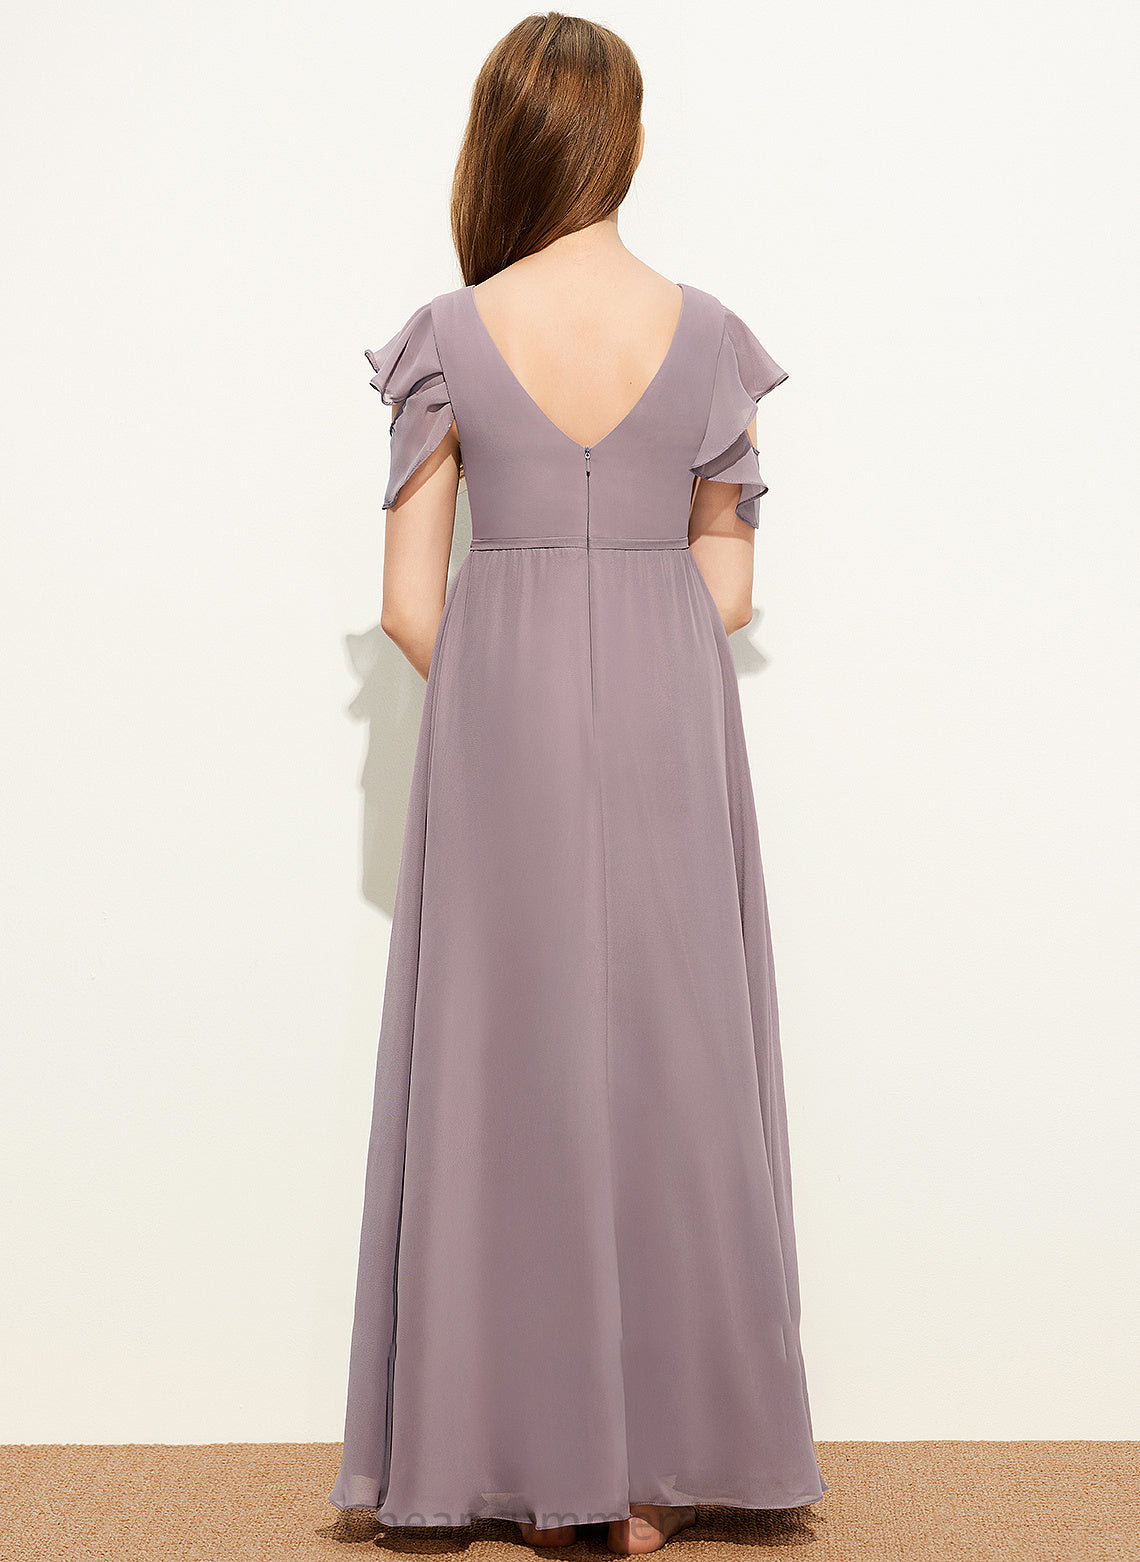 With Cascading Junior Bridesmaid Dresses Ruffles Justice A-Line Neck Floor-Length Scoop Chiffon